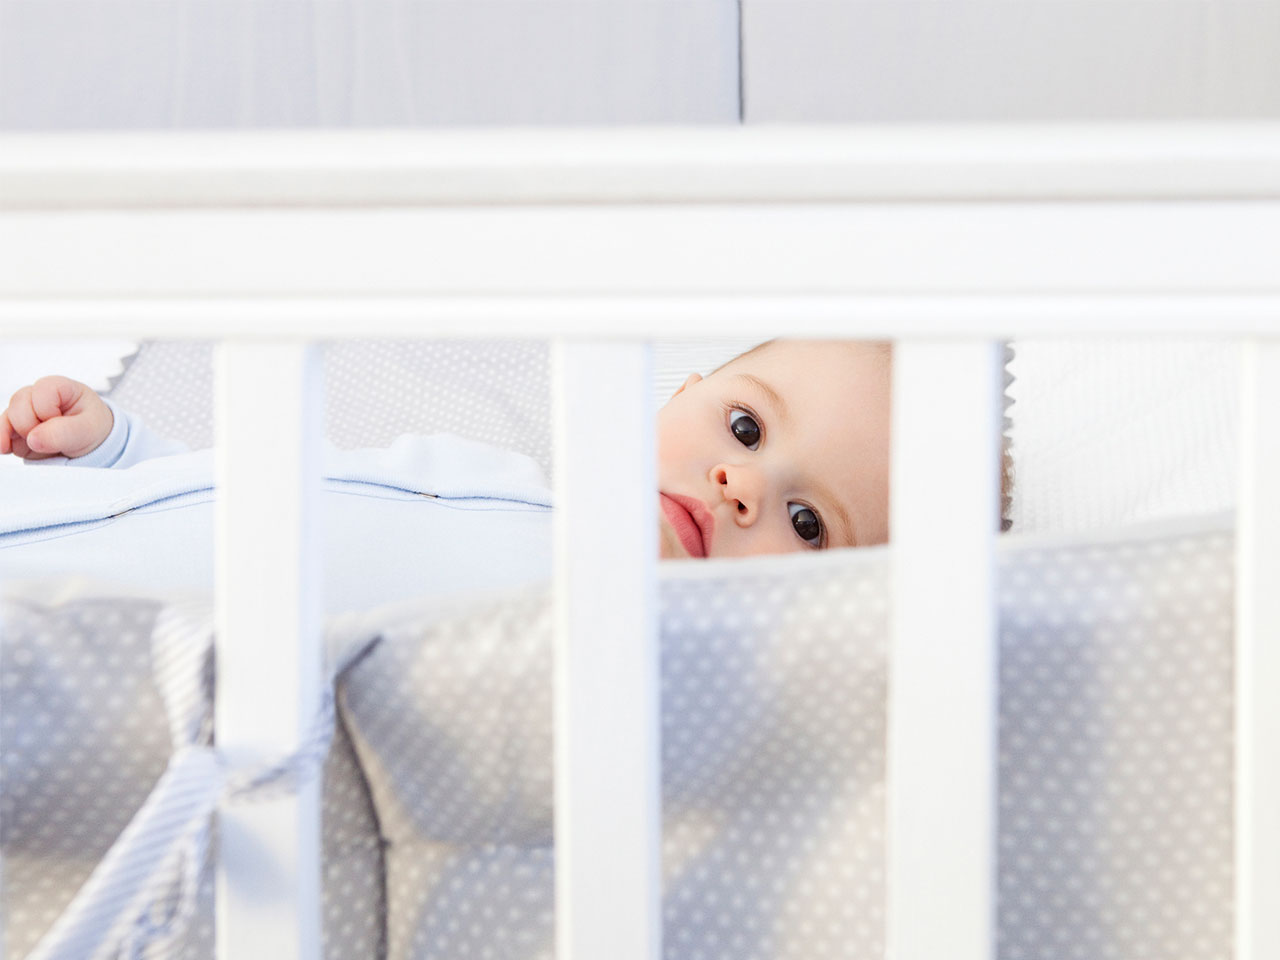 Are crib bumpers safe?